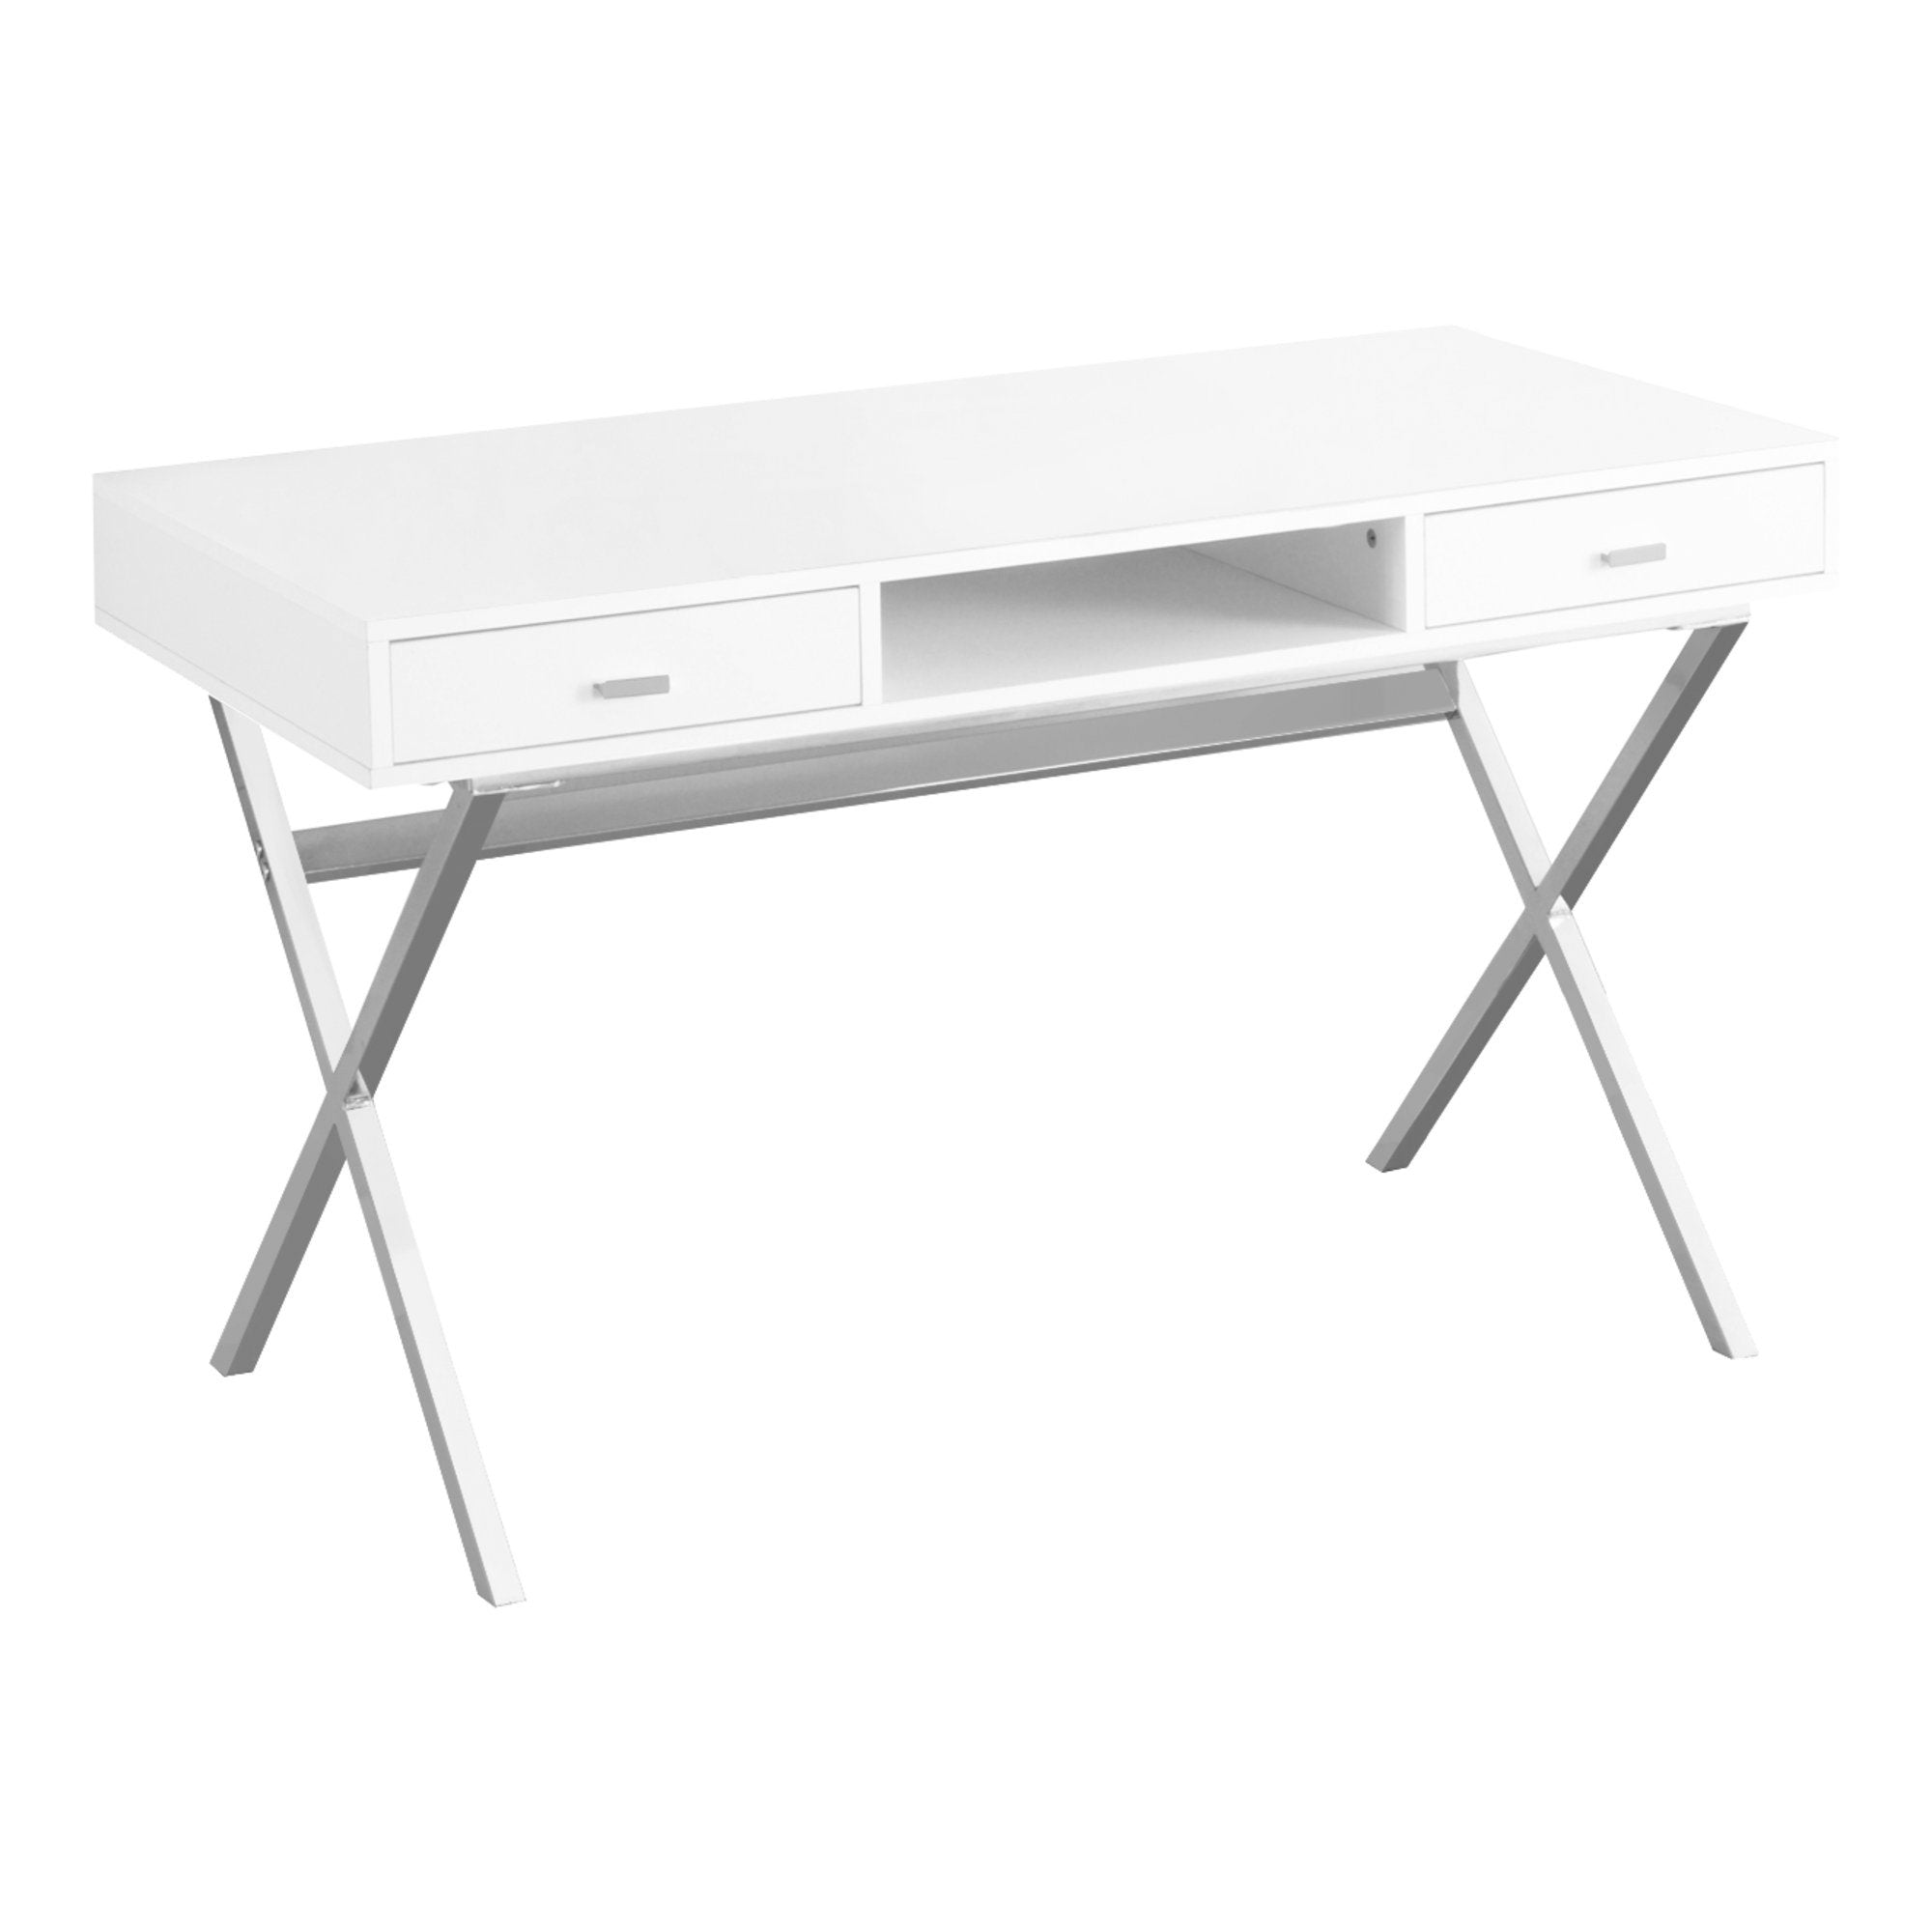 MN-487211    Computer Desk, Home Office, Laptop, Storage Drawers, 48"L, Metal, Laminate, Glossy White, Chrome, Contemporary, Modern